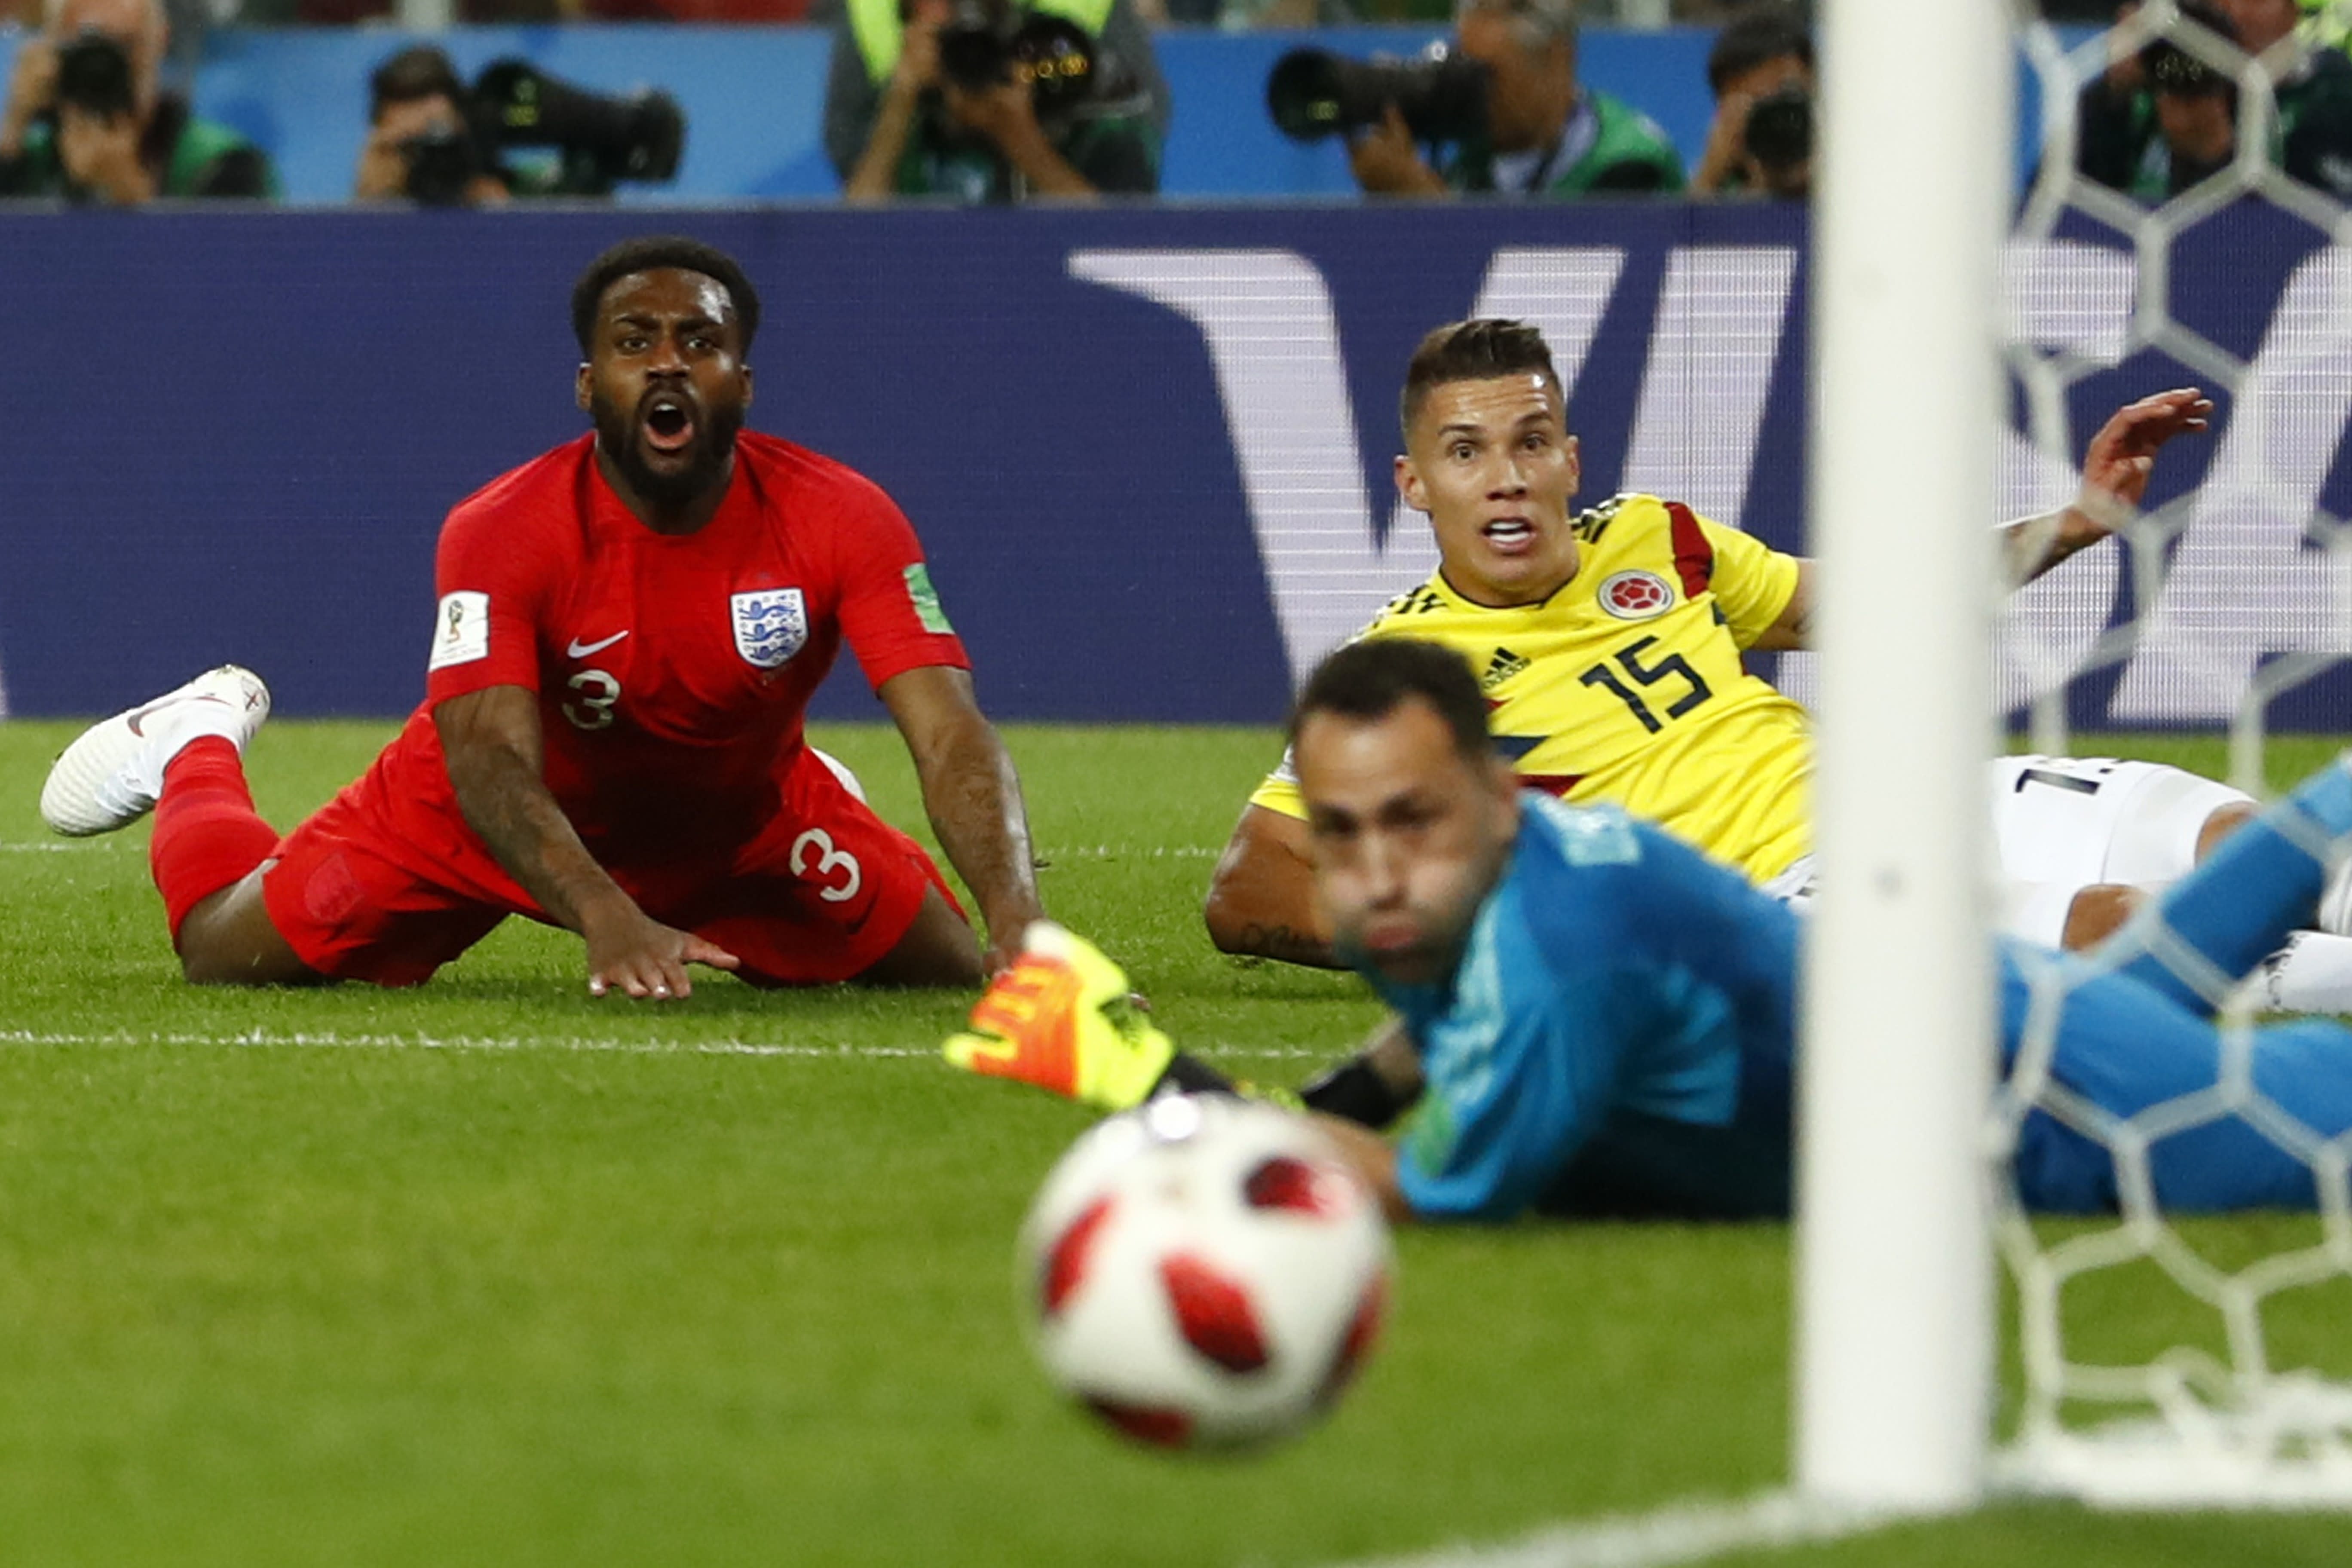 Top images from the Colombia vs. England match